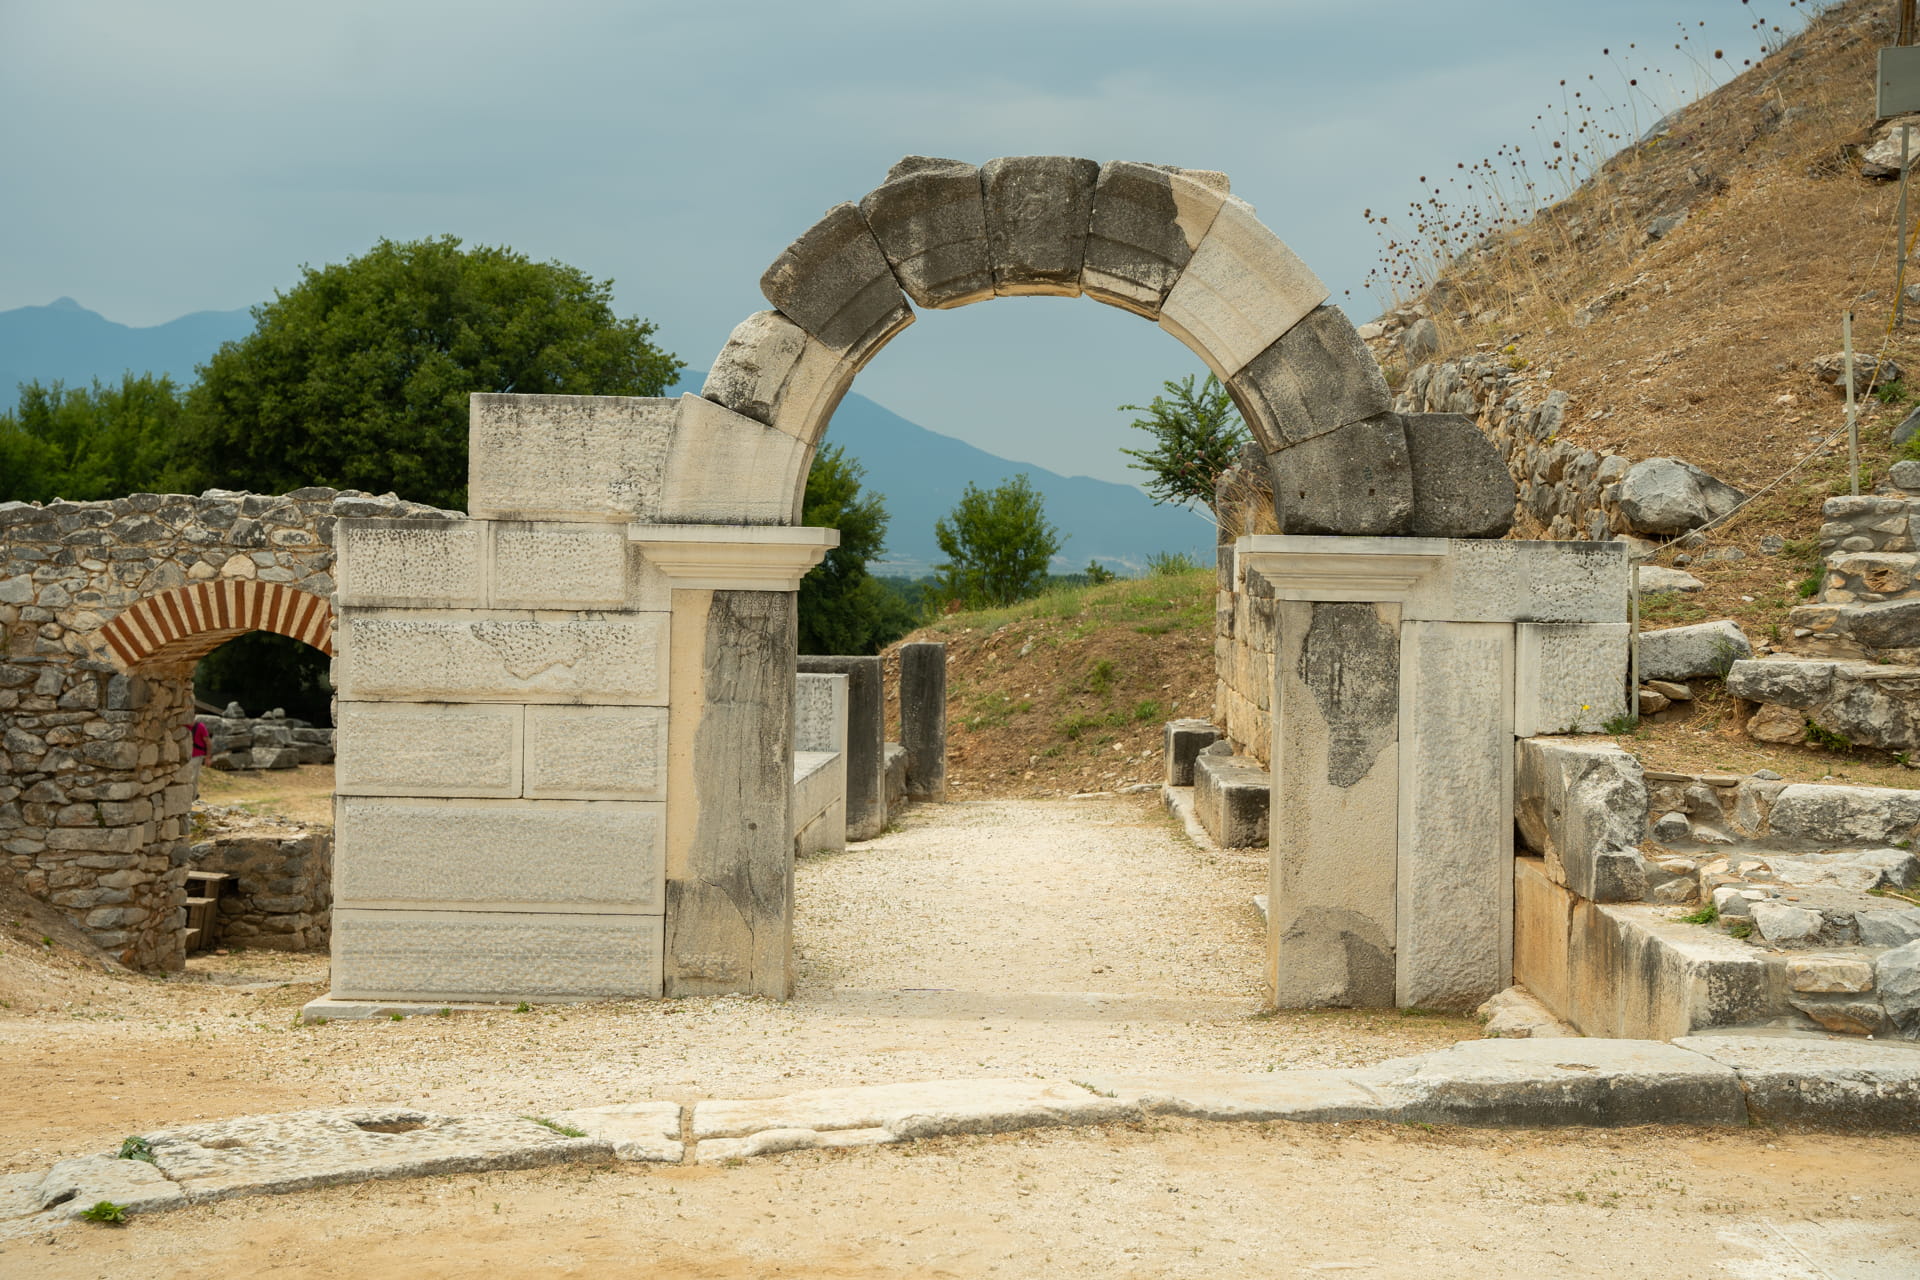 Originally named Krenides, Philippi was founded in 360 BC as a colony of Thassos